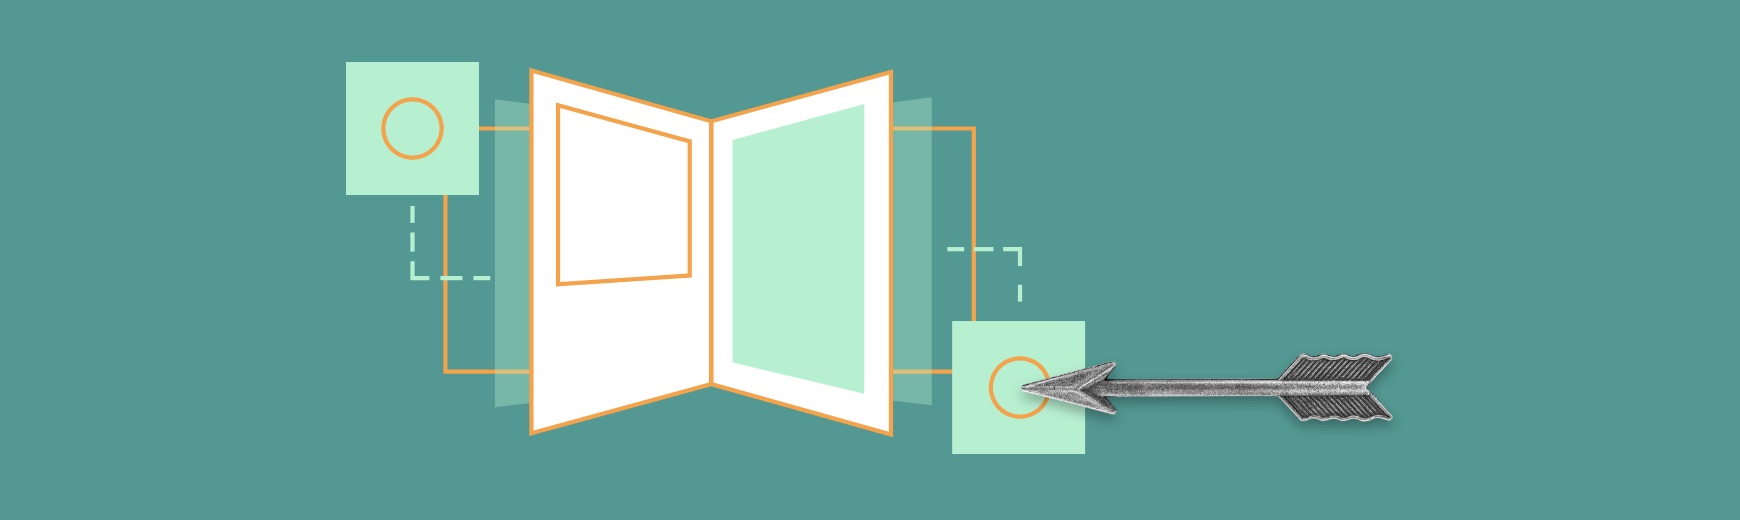 Illustration of book pages and arrow pointing at it